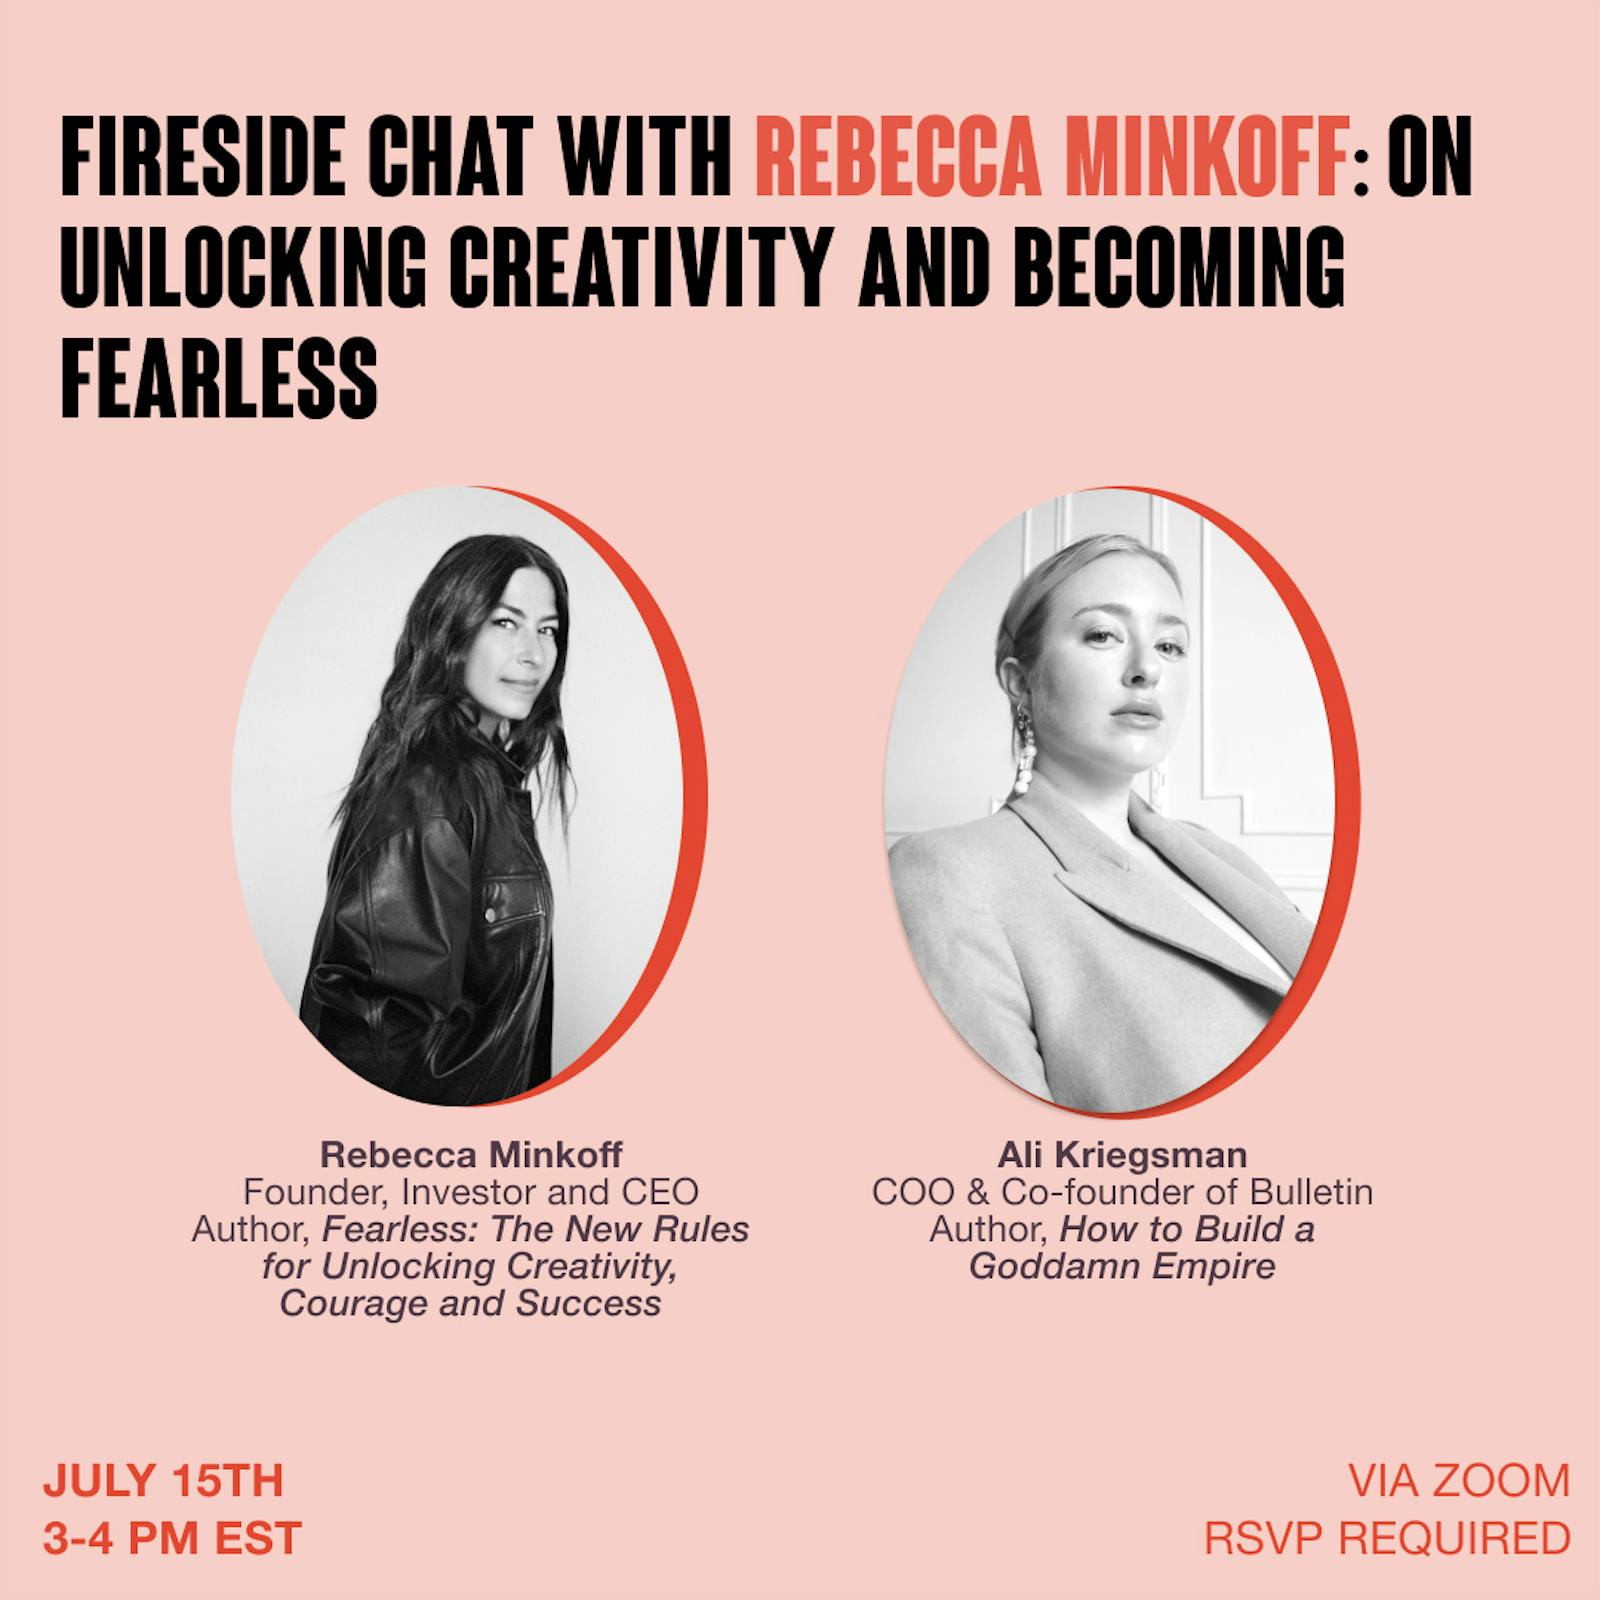 Fireside Chat with Rebecca Minkoff: on Unlocking Creativity & Becoming Fearless